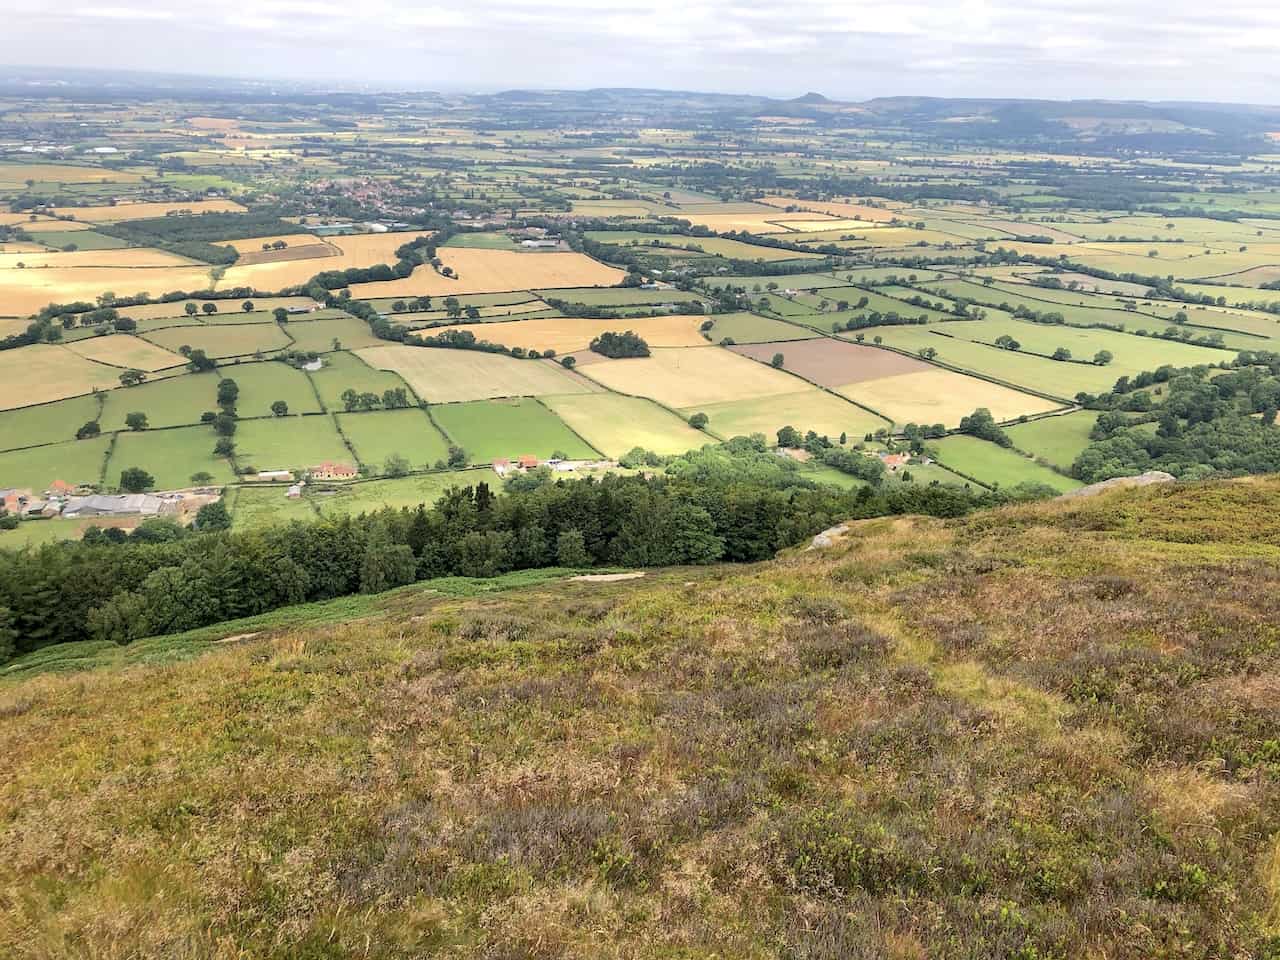 From the northward view along the Cleveland Way on Cold Moor, the distinctive shape of Roseberry Topping emerges on the horizon, to the right of centre. The charming village of Great Broughton nestles in the landscape's top third, on the left.